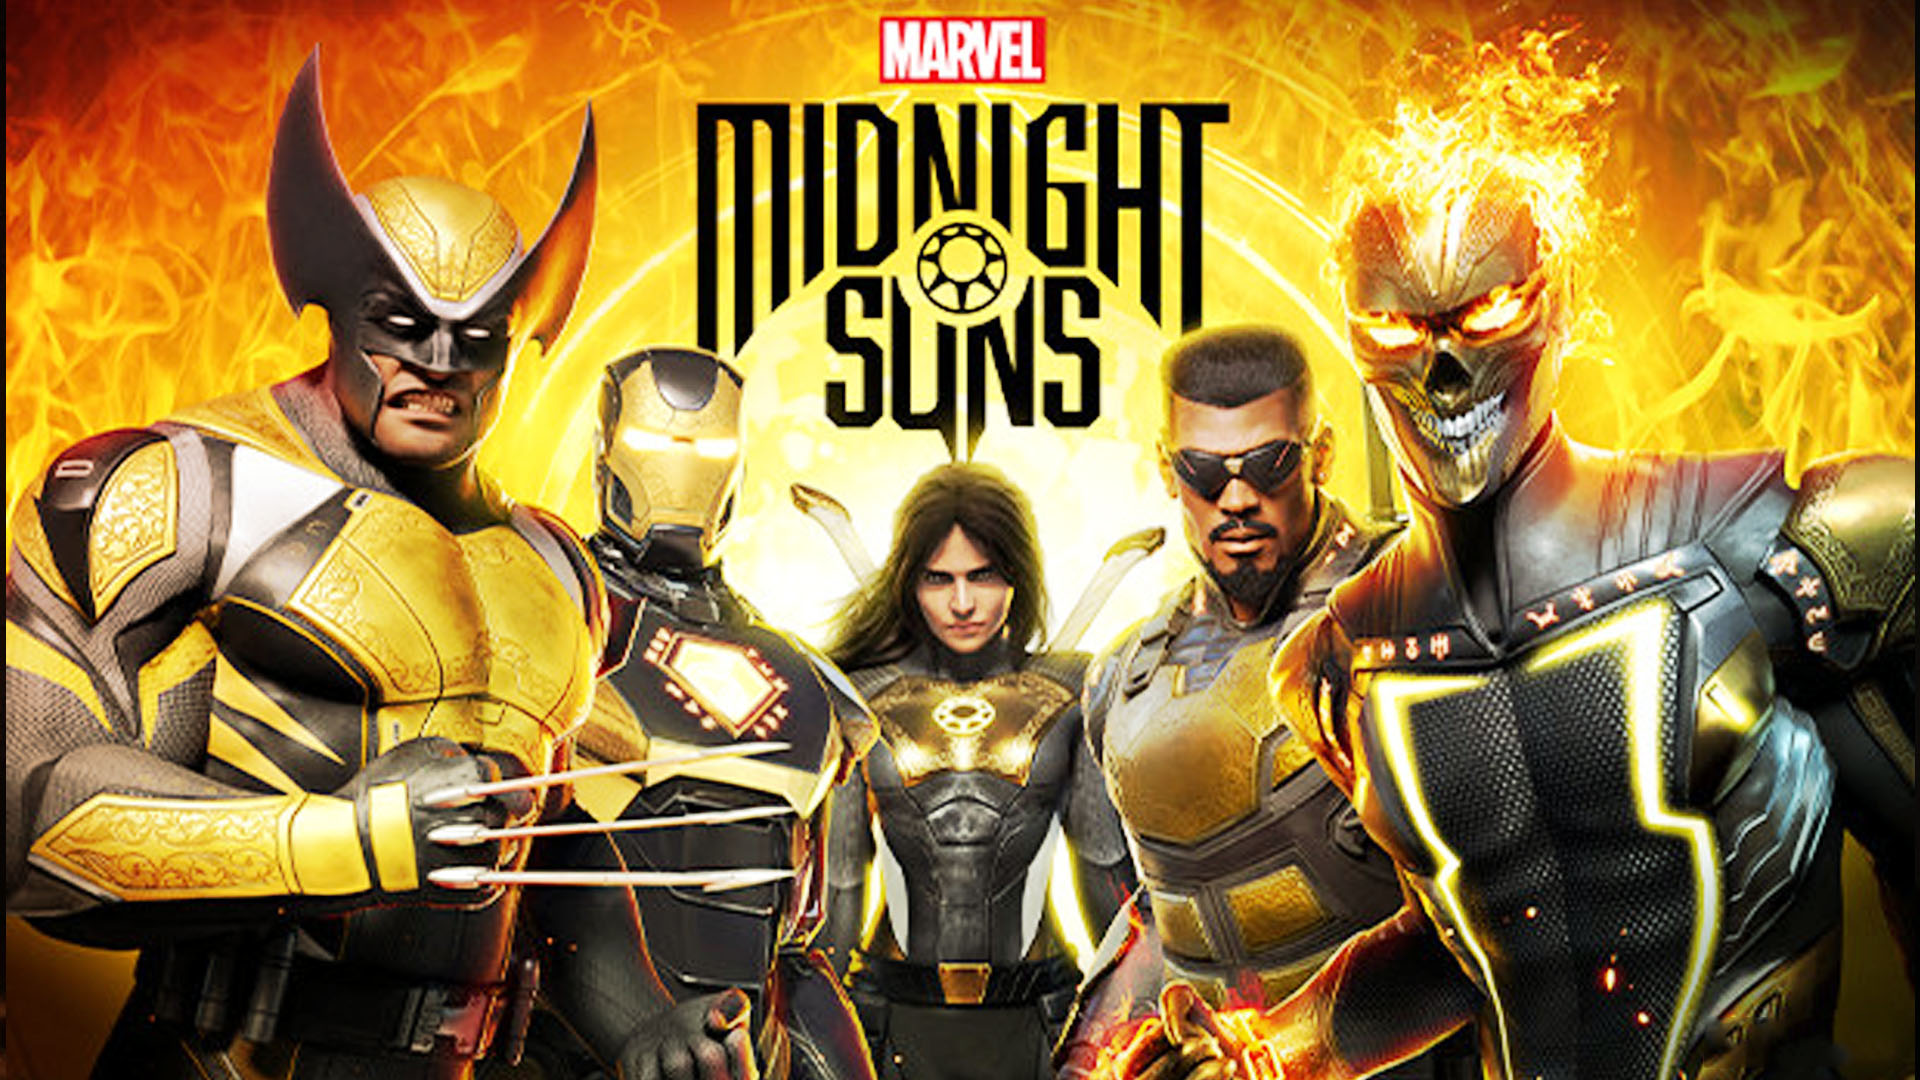 Marvel's Midnight Suns Launch Date, Gameplay, Characters